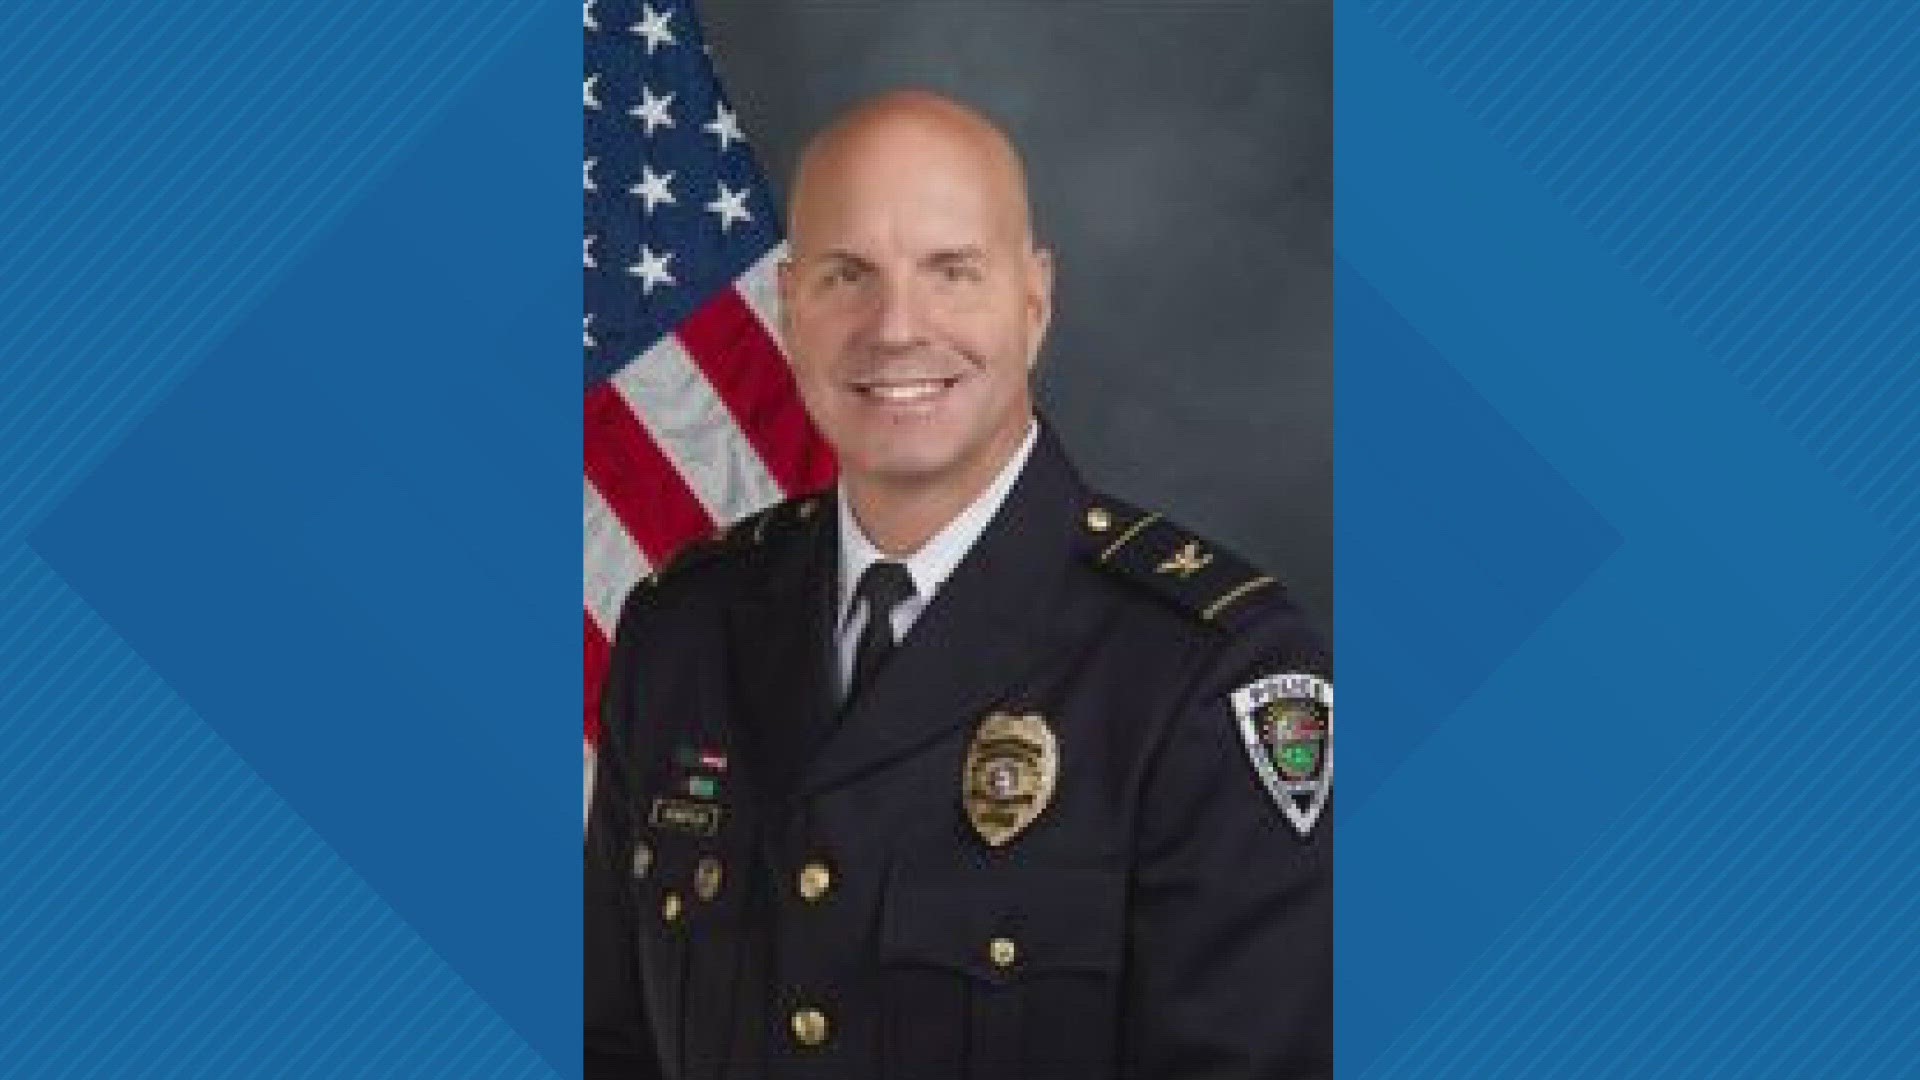 The Ballwin Board of Aldermen voted unanimously in a closed meeting last week to place police Chief Douglas Schaeffler on paid leave. There was a closed session.